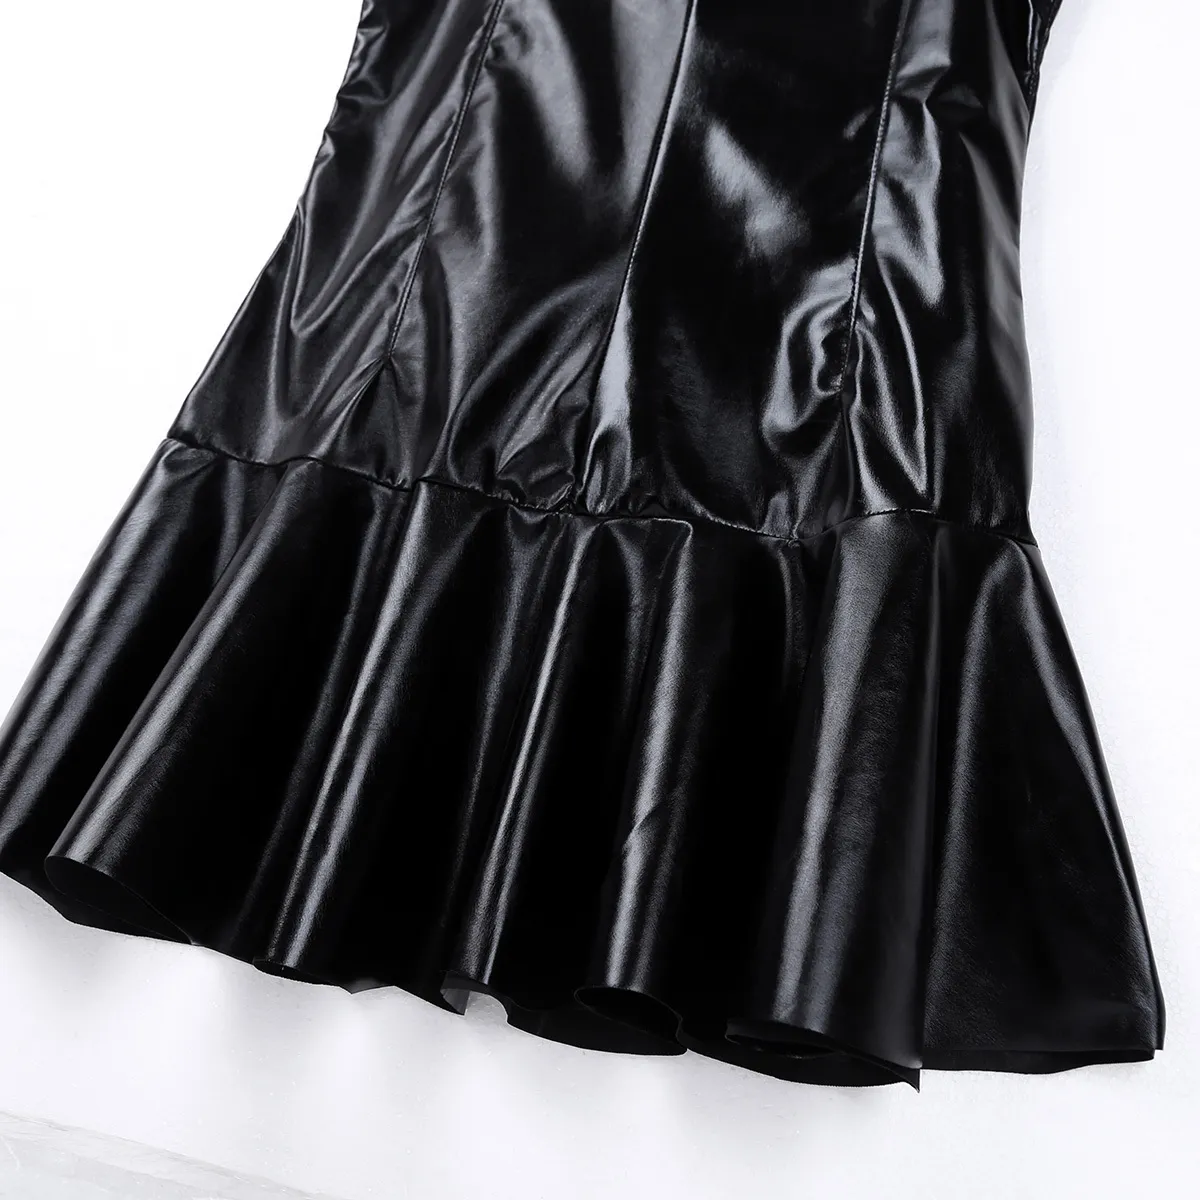 Womens Ladies Fashion Cocktail Party Dresses Wet Look PU Leather High Collar Sleeveless Bottom Flare Mini Dress Pole Clubwear T200107